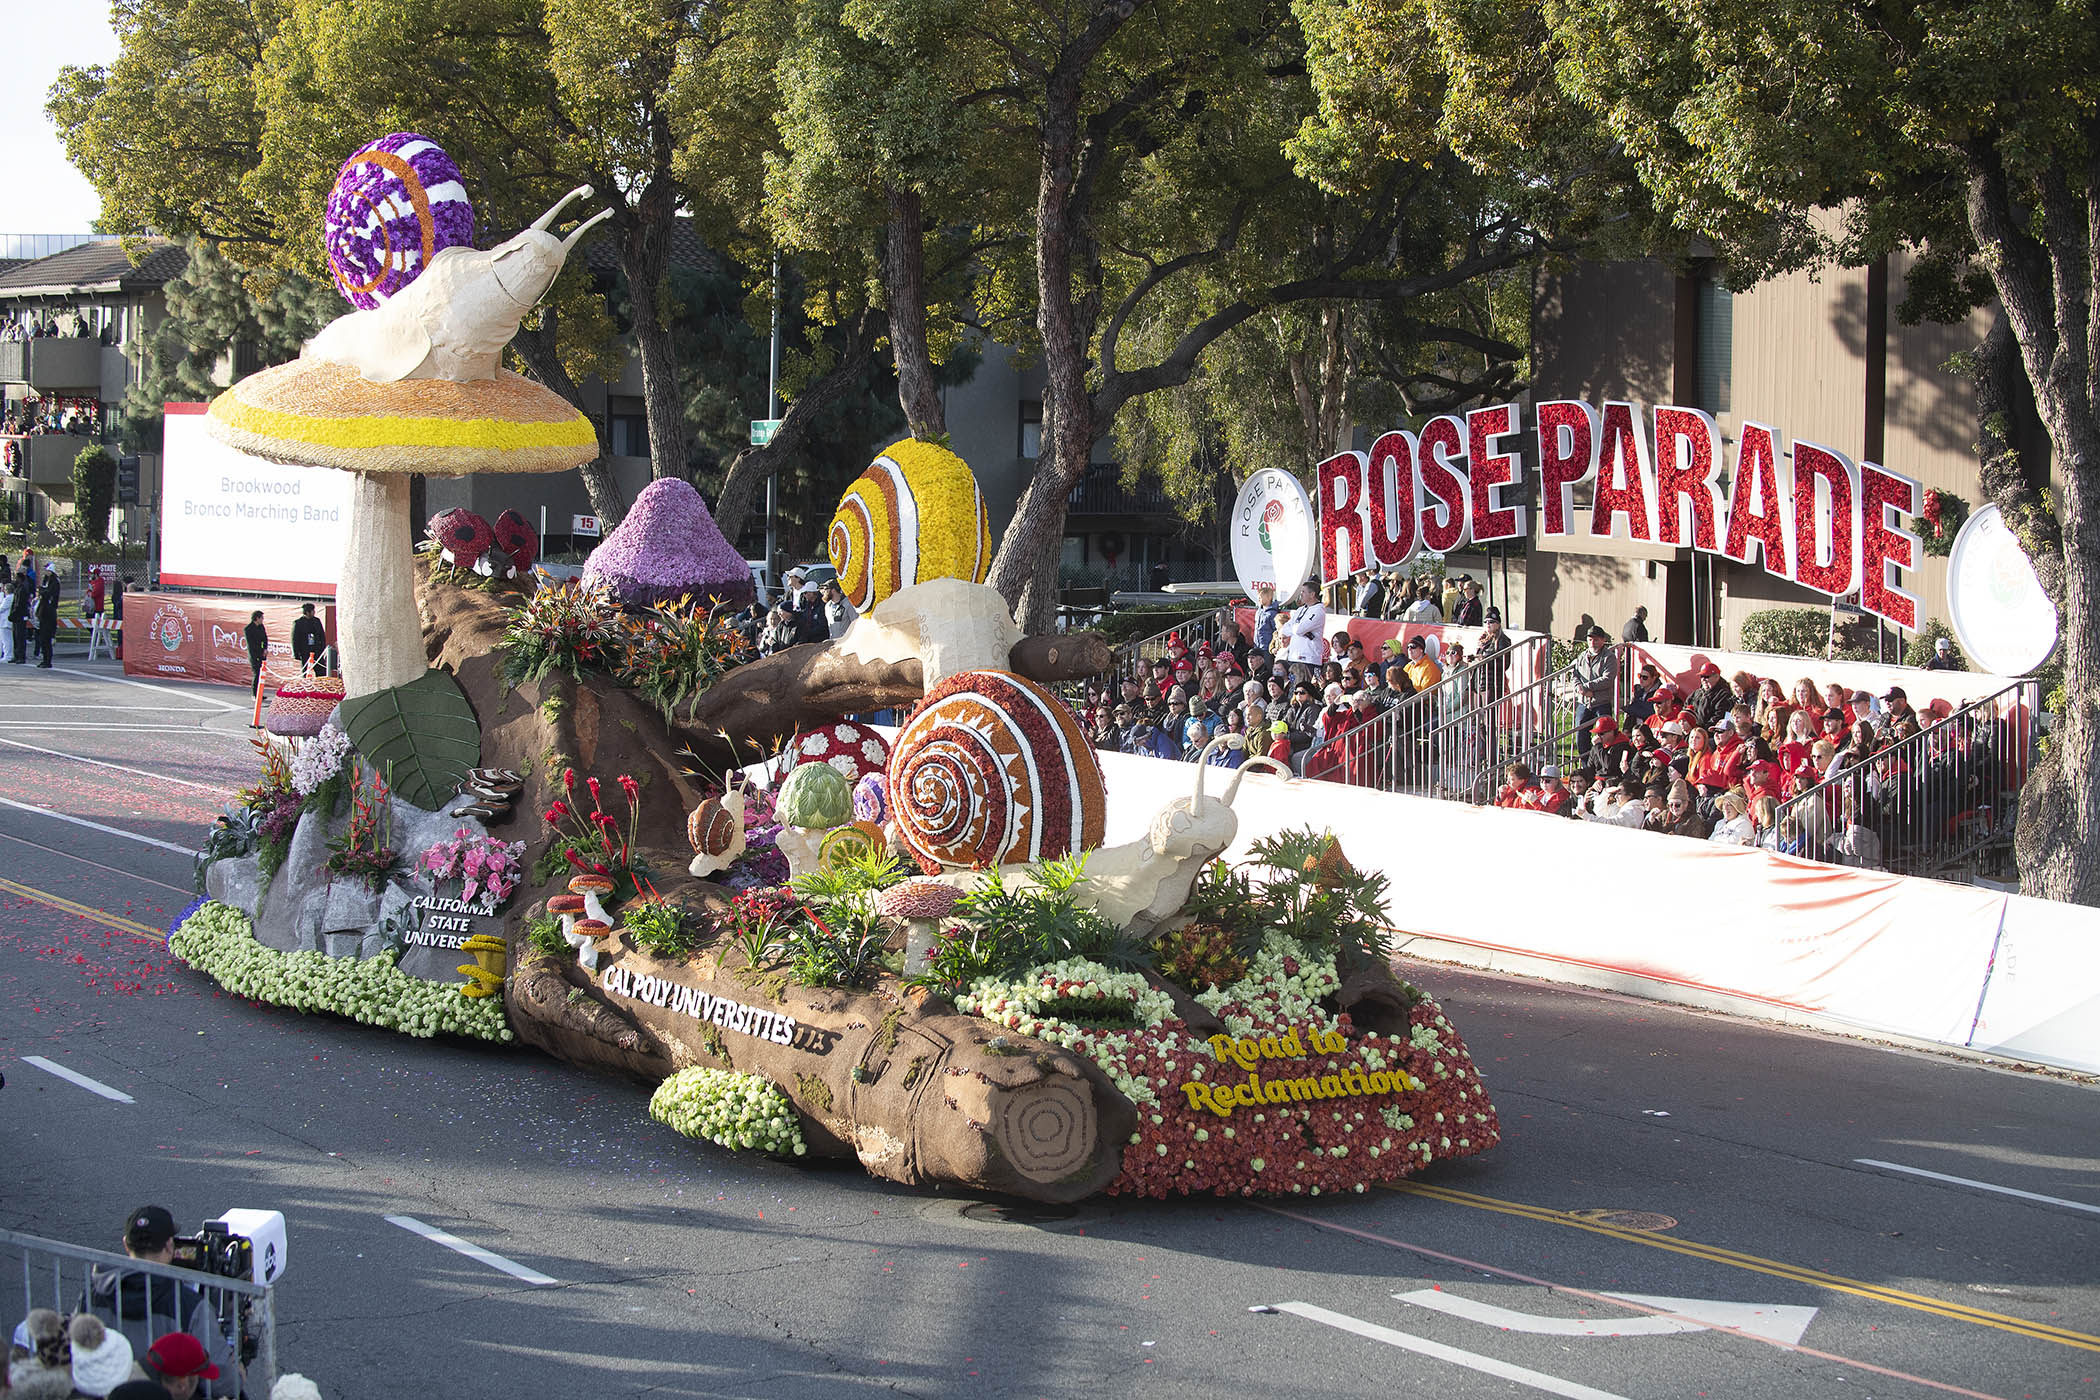 Cal Poly universities' float at the Rose Parade on Jan. 2, 2023.